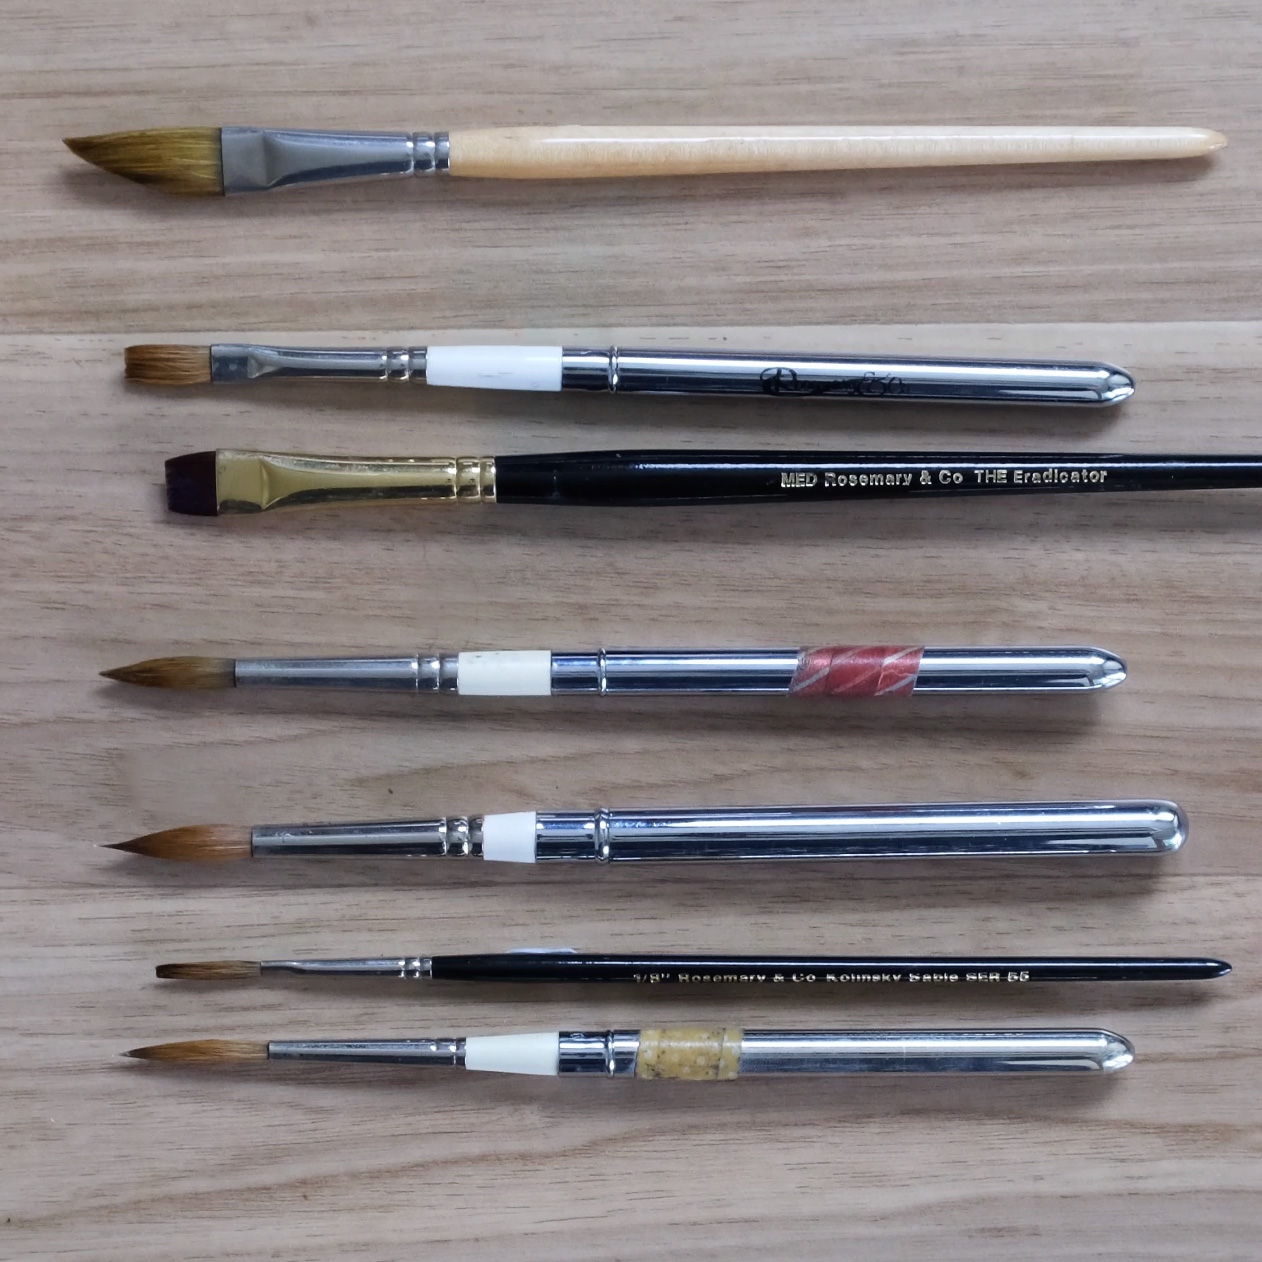 CHOOSE YOUR SIZE Highest Quality Rosemary /& Co Artist Model Dry Brush Series